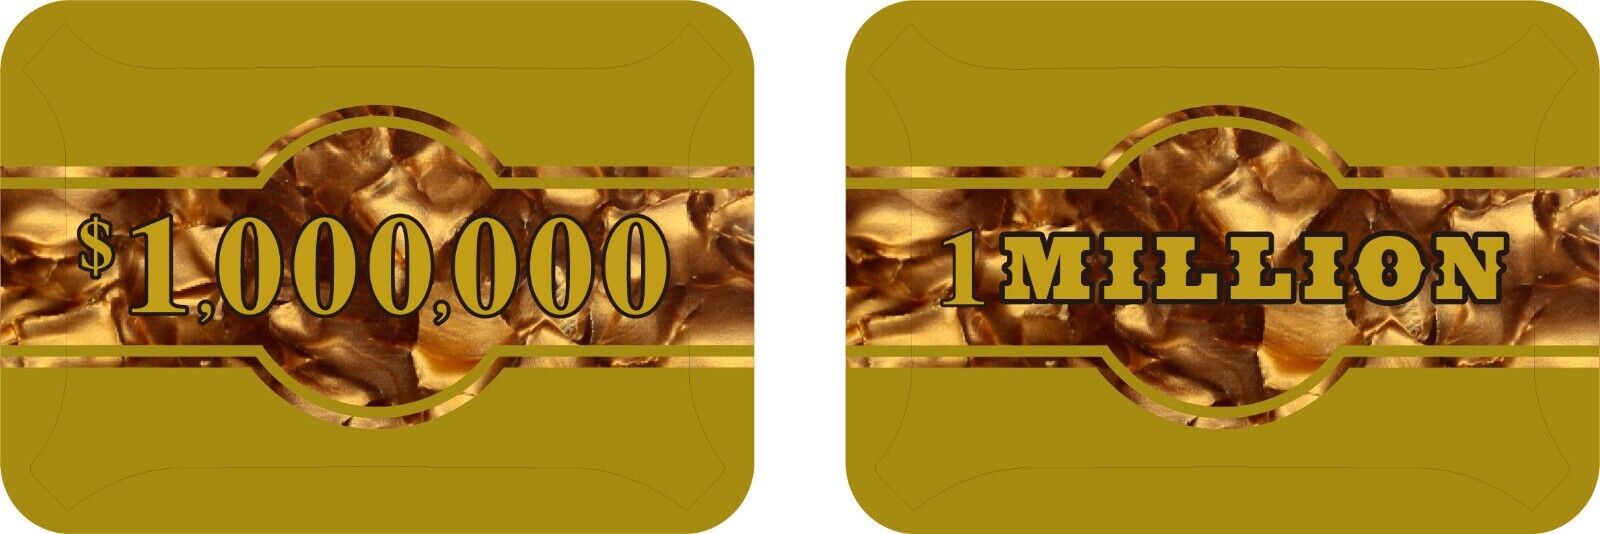 High Stakes $1,000,000 Poker Plaque Premium Quality NEW Double Sided